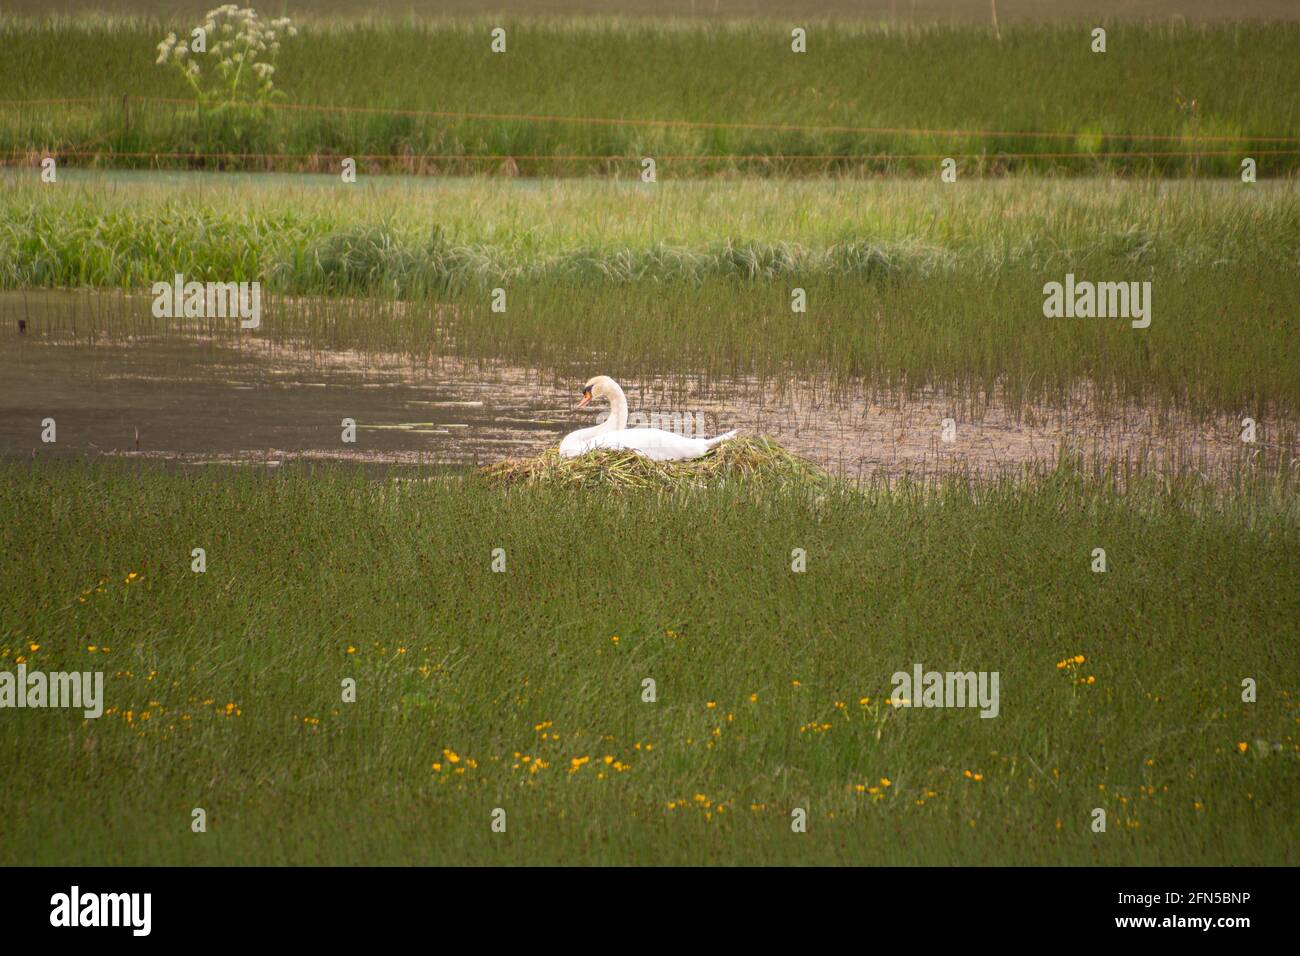 white swan nesting in natural lake (Toblacher See) in Toblach, South Tyrol, Italy Stock Photo